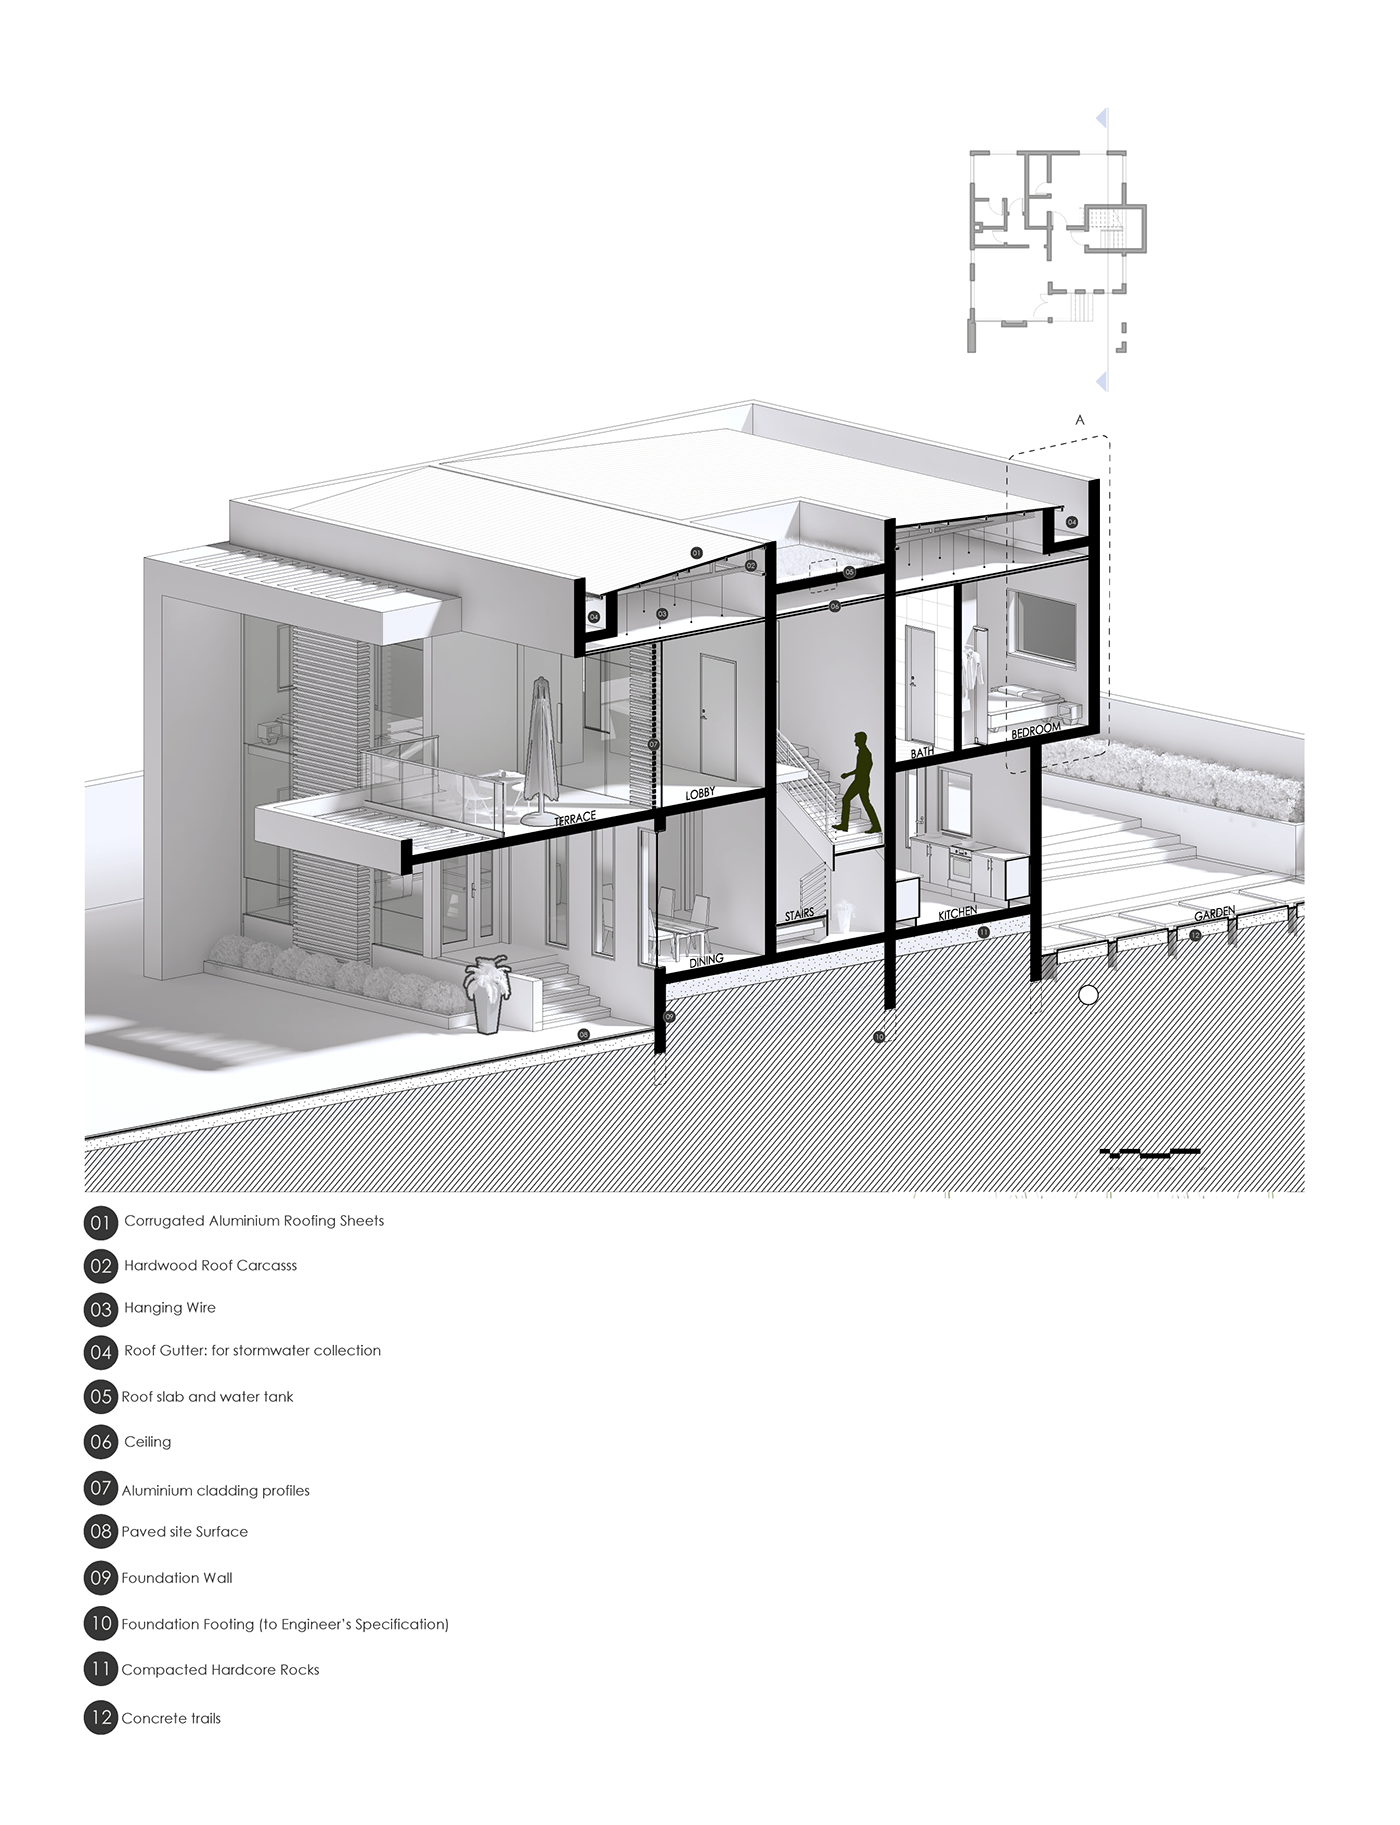 3D Section of Building mass.
Produced in Adobe Illustrator